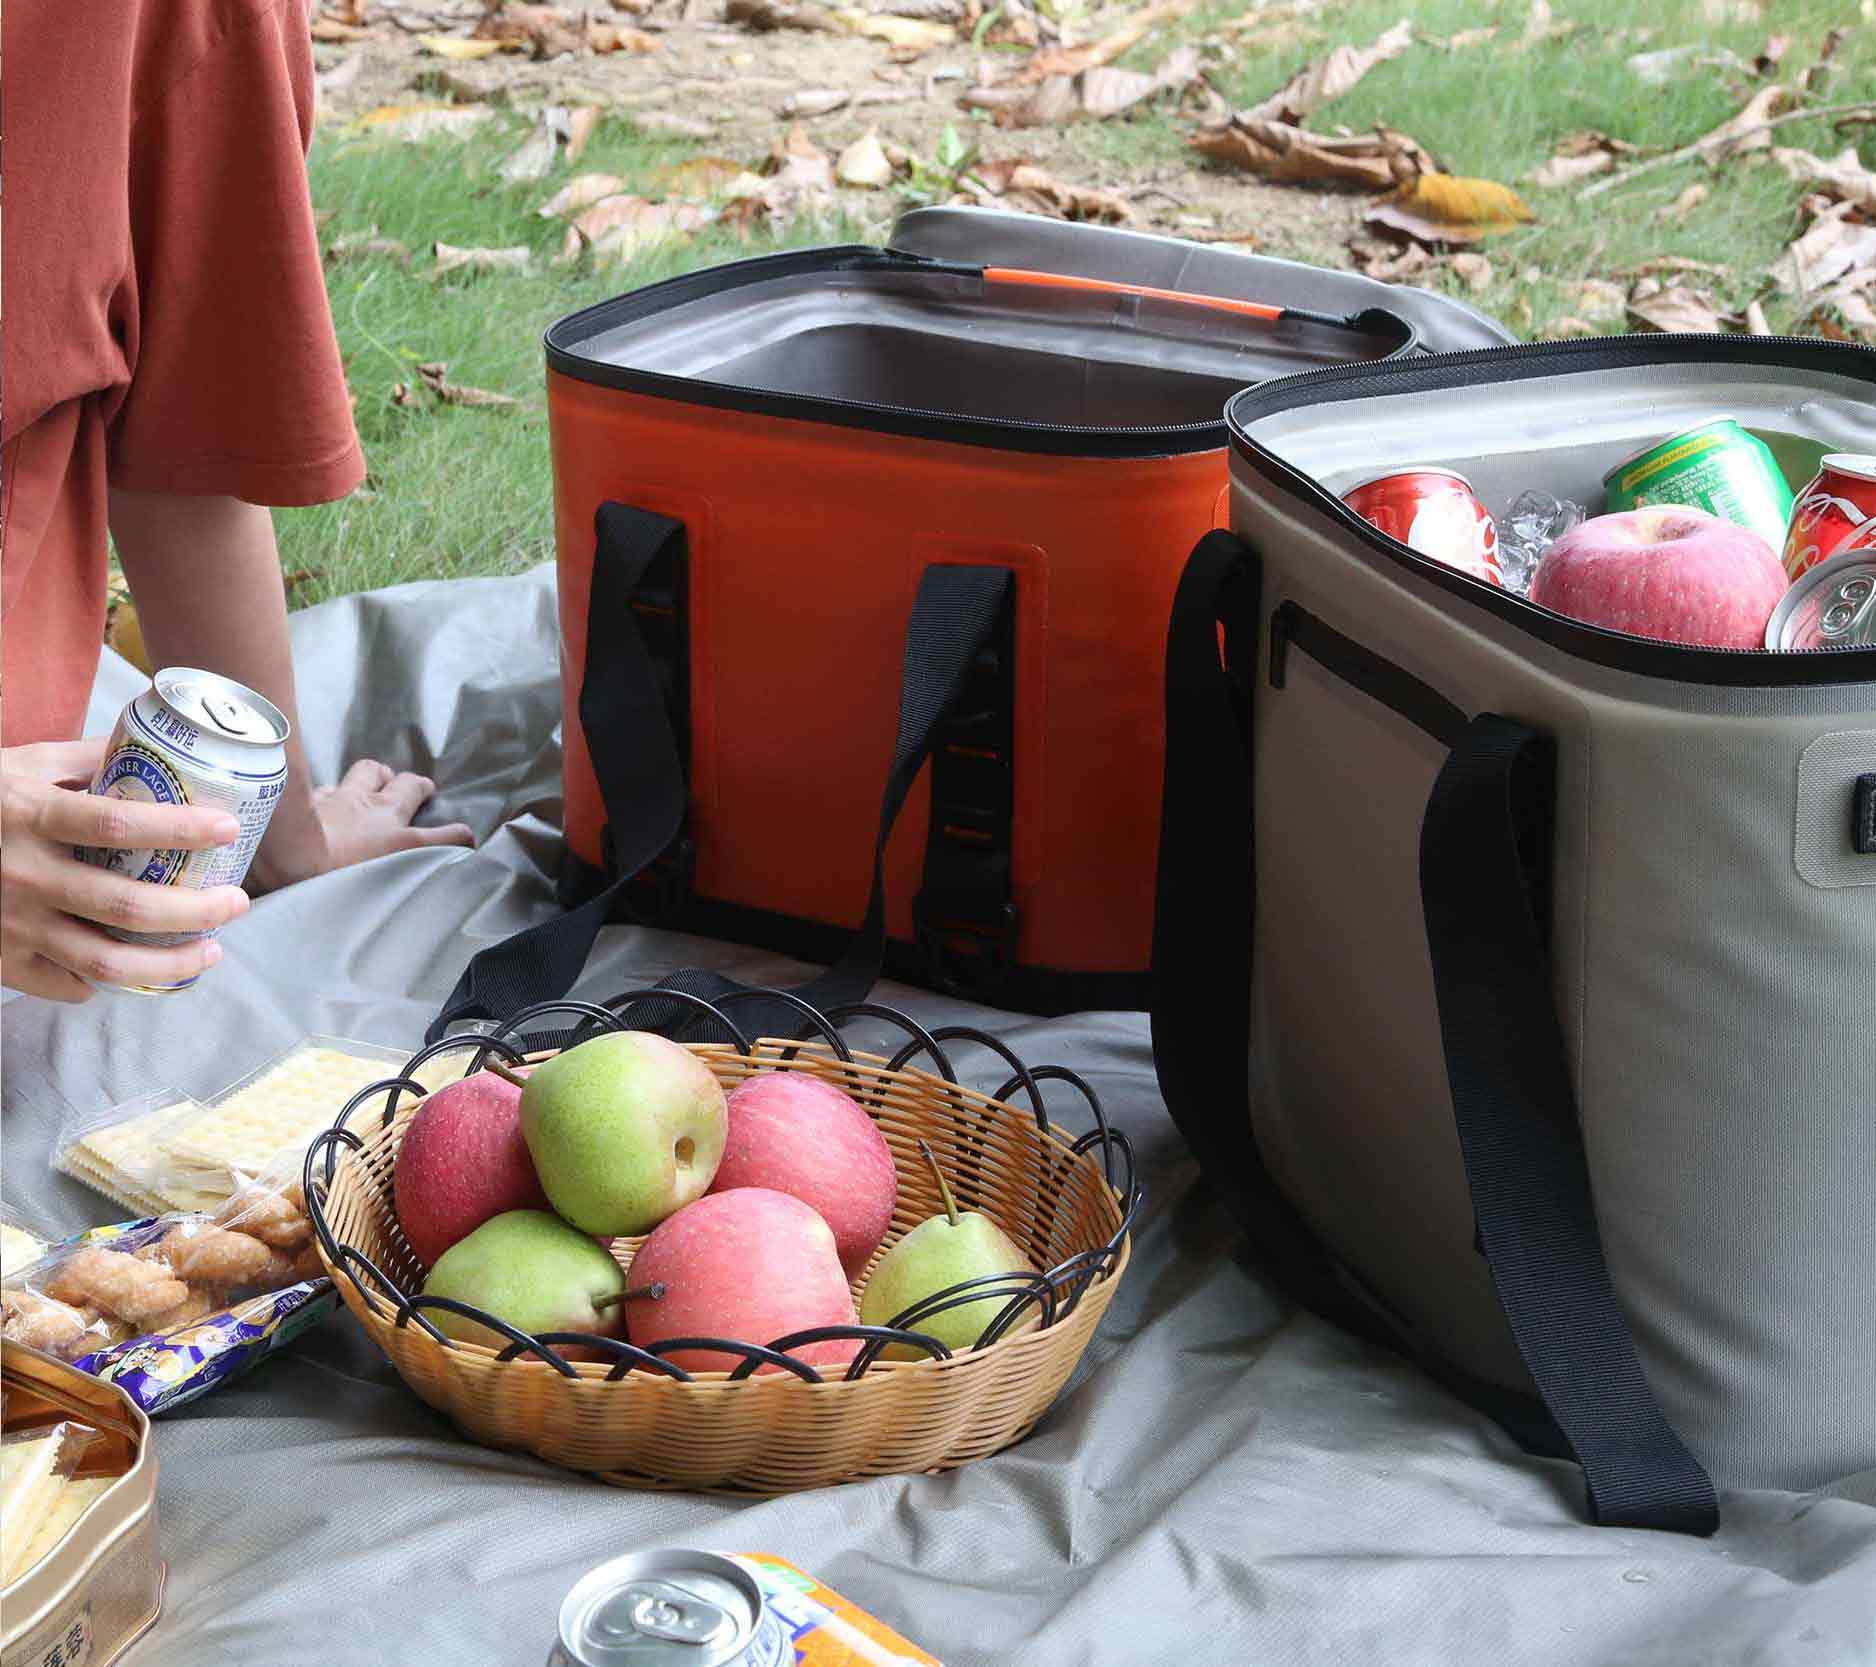 Waterproof Cooler Bags: Technical Exploration of Maintaining Food and Beverage Temperatures